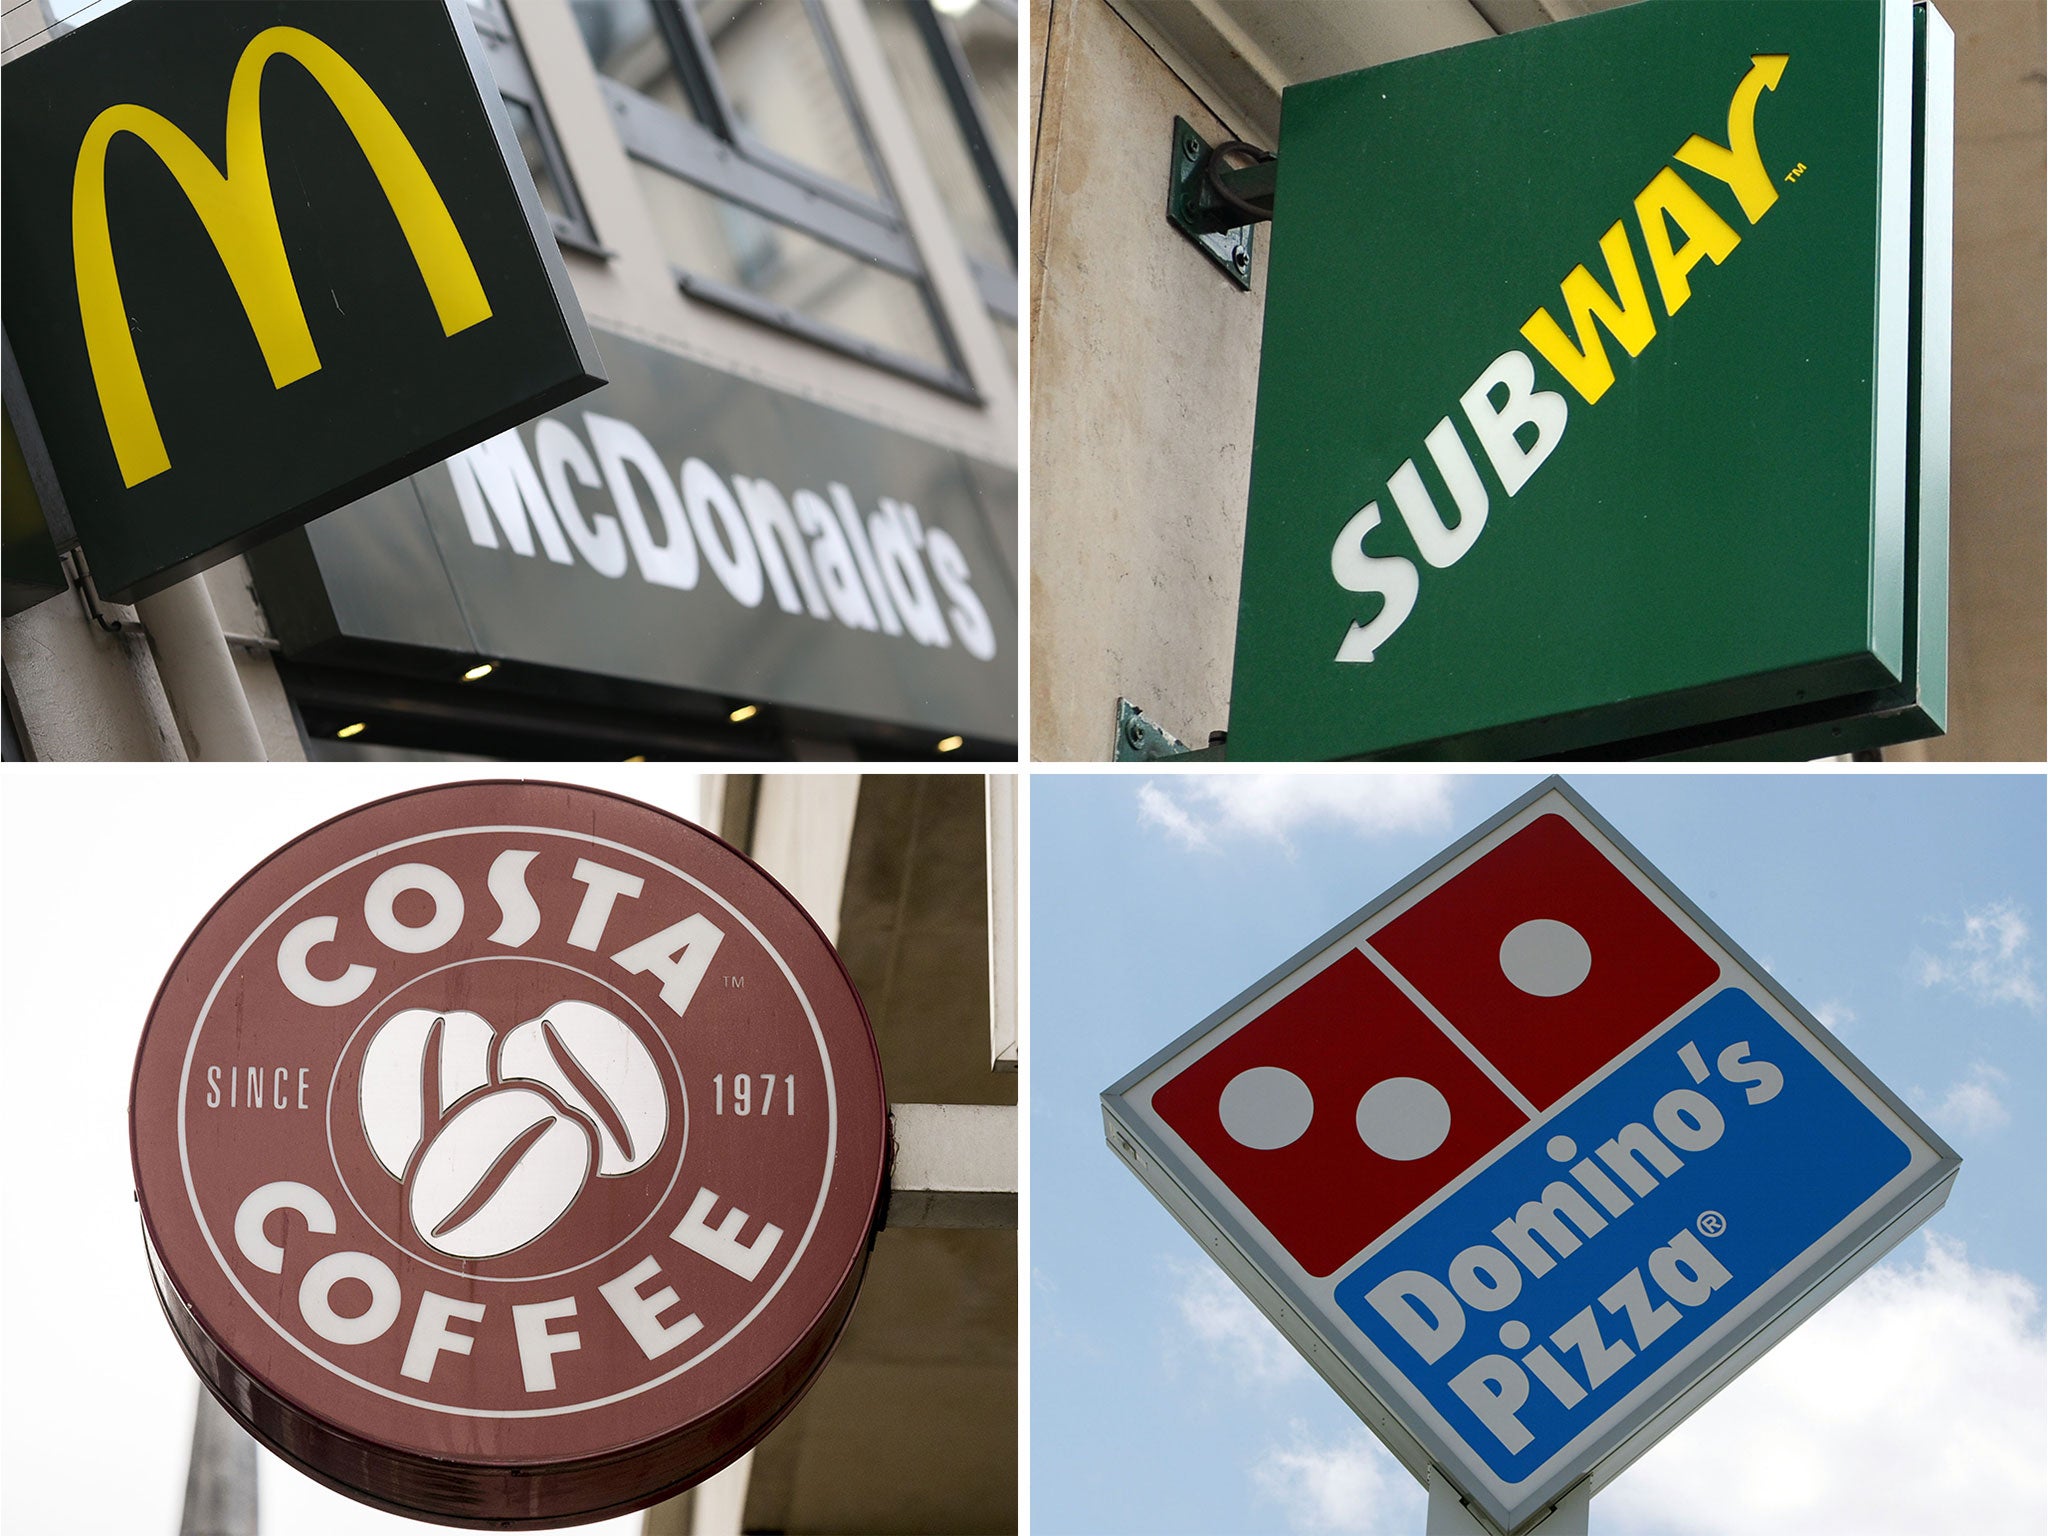 Mcdonald's, Subway, Costa Coffee and Domino's Pizza are among a group of 13 chains that have been accused of profiting from 'poverty wages'